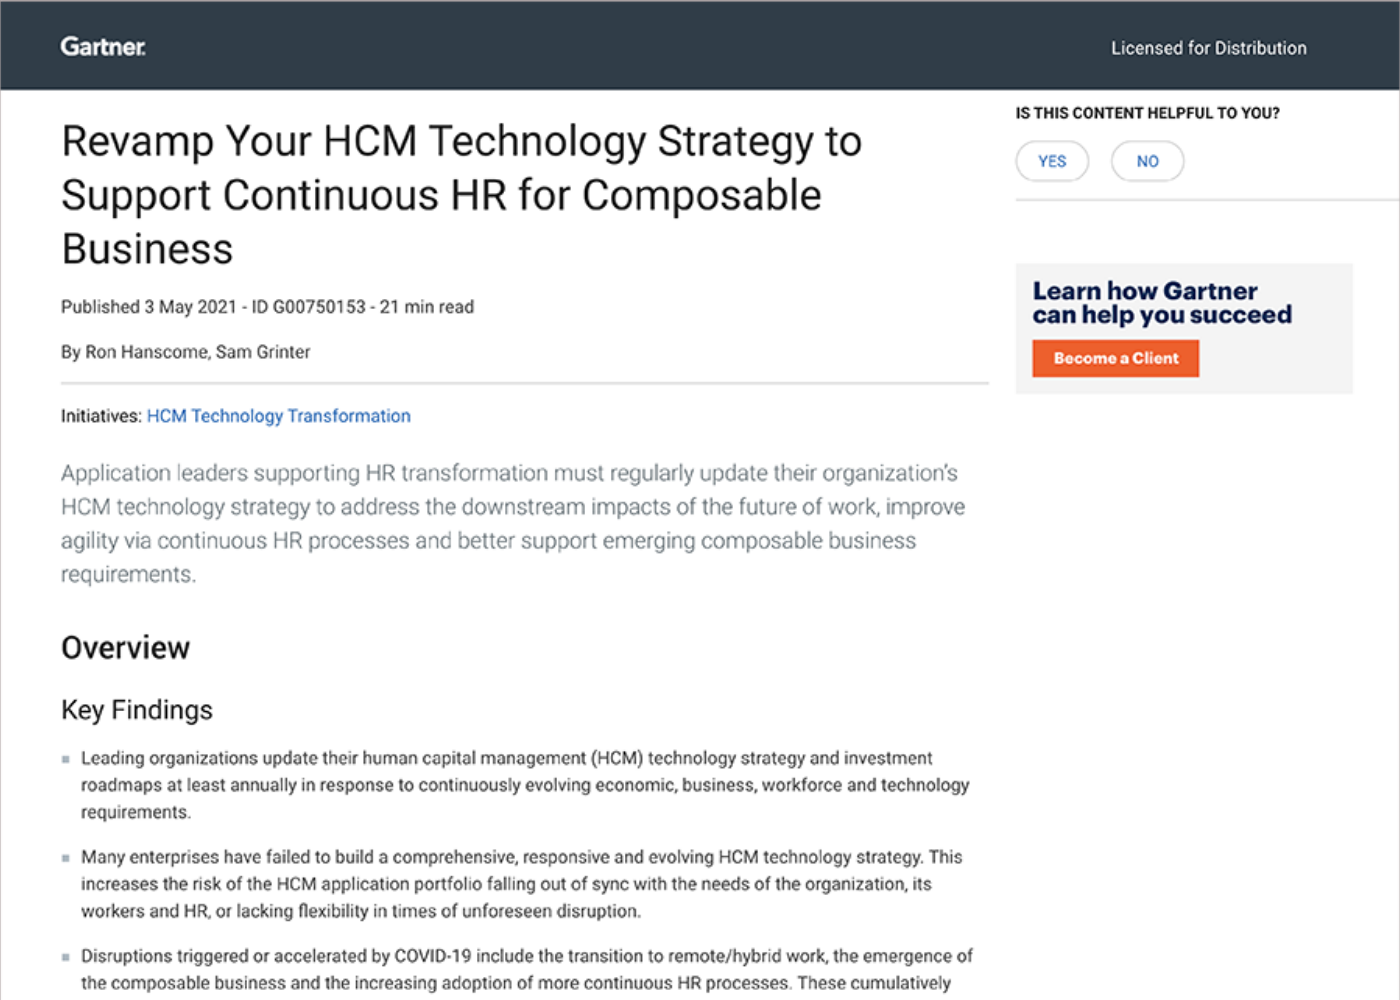 Revamp Your HCM Technology Strategy to Support Continuous HR for Composable Business